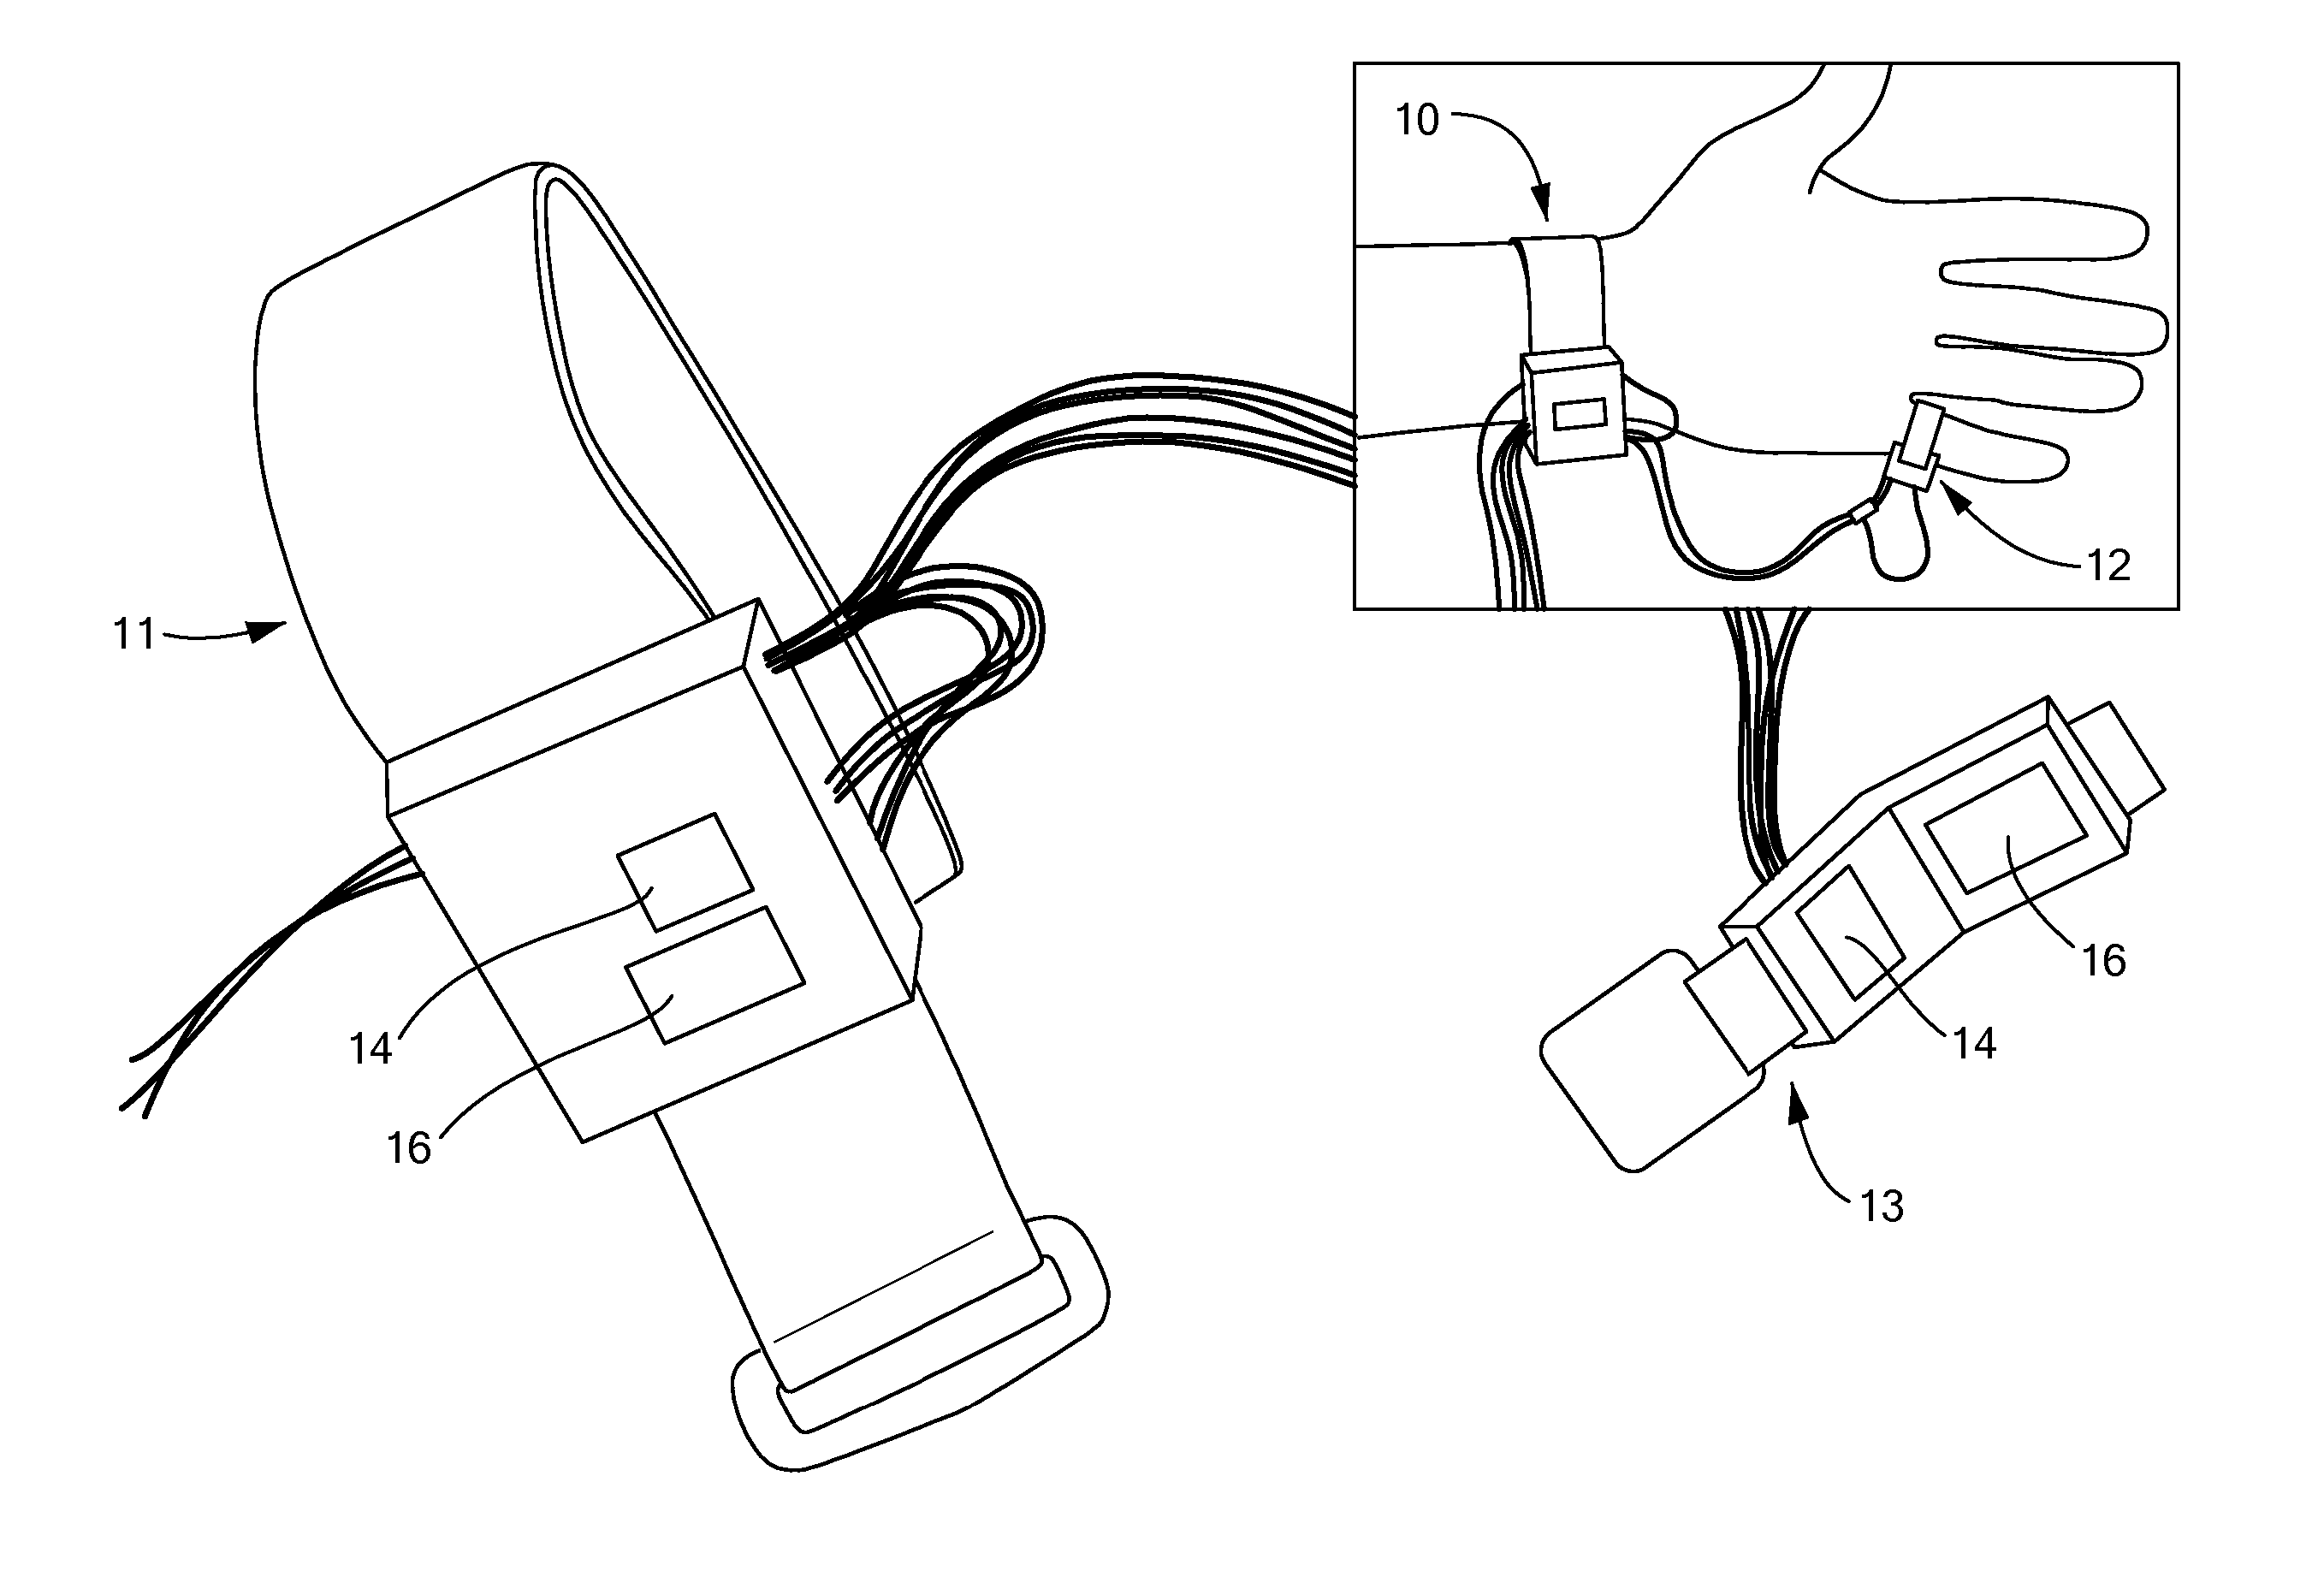 Wearable Pulse Wave Velocity Blood Pressure Sensor and Methods of Calibration Thereof